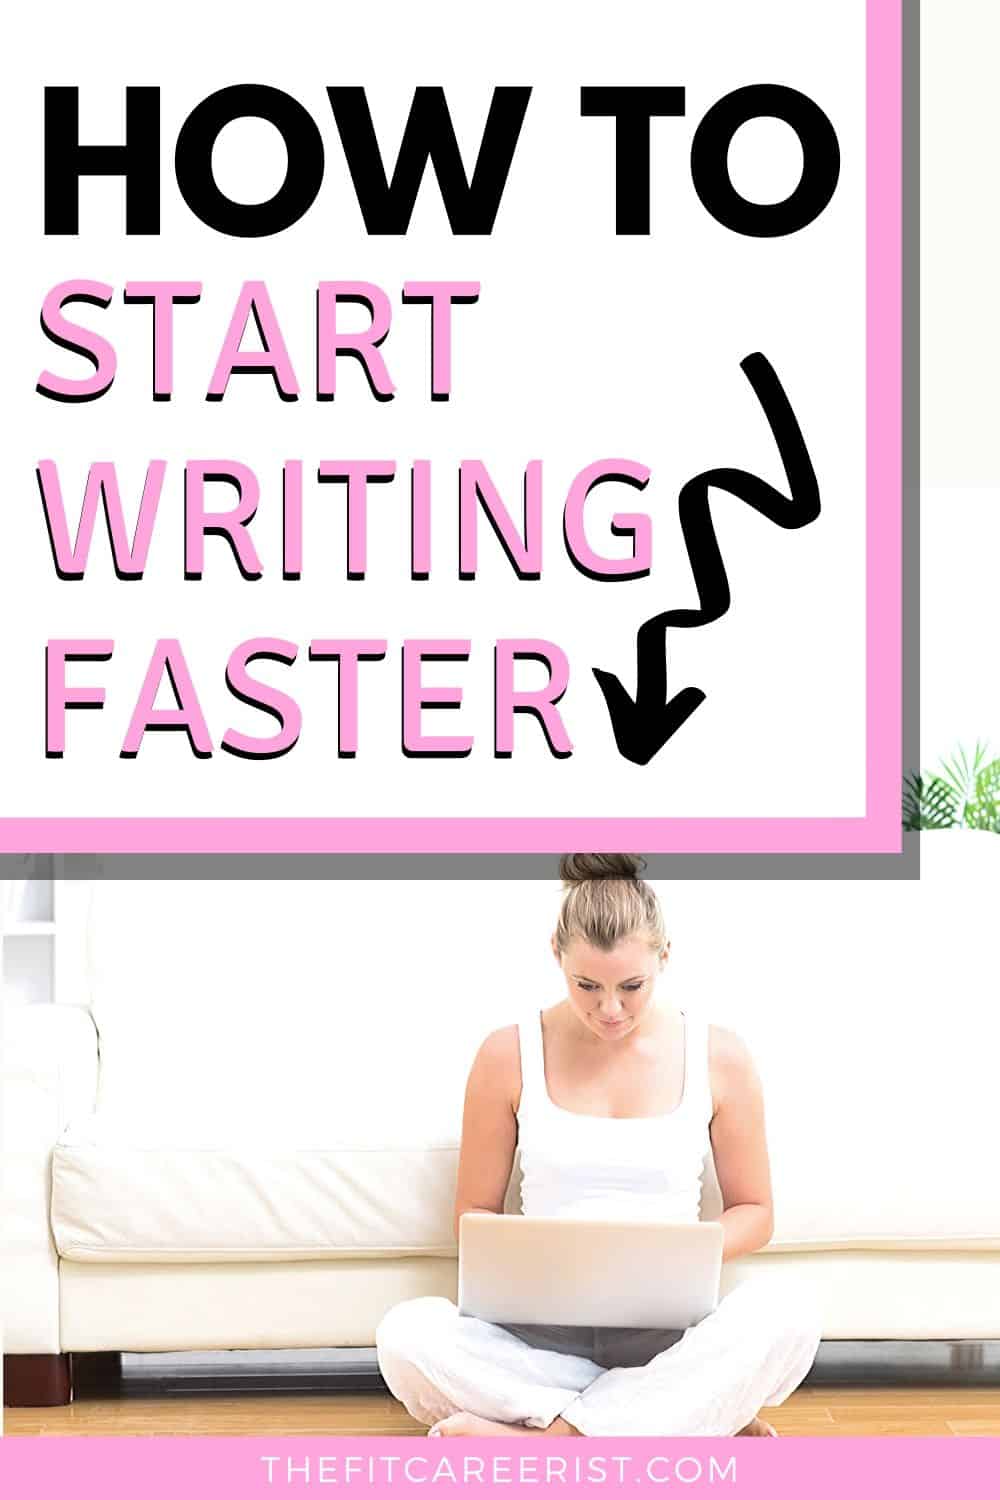 How to Start Writing Faster